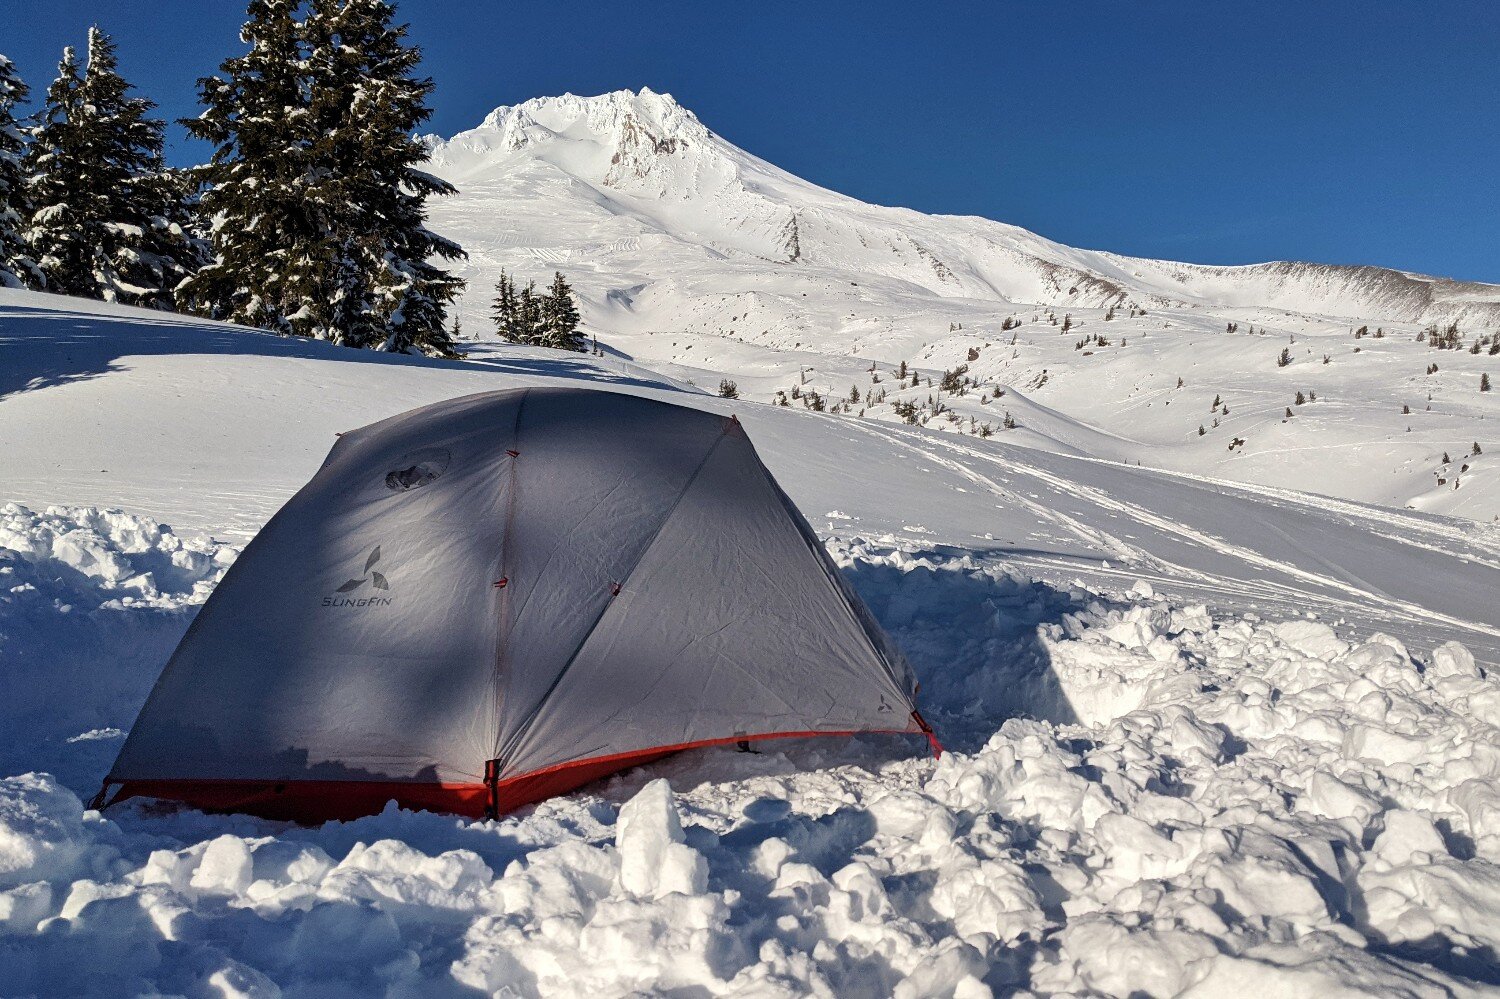 The Slingfin Crossbow 4-season tent in front of a snowy mountain